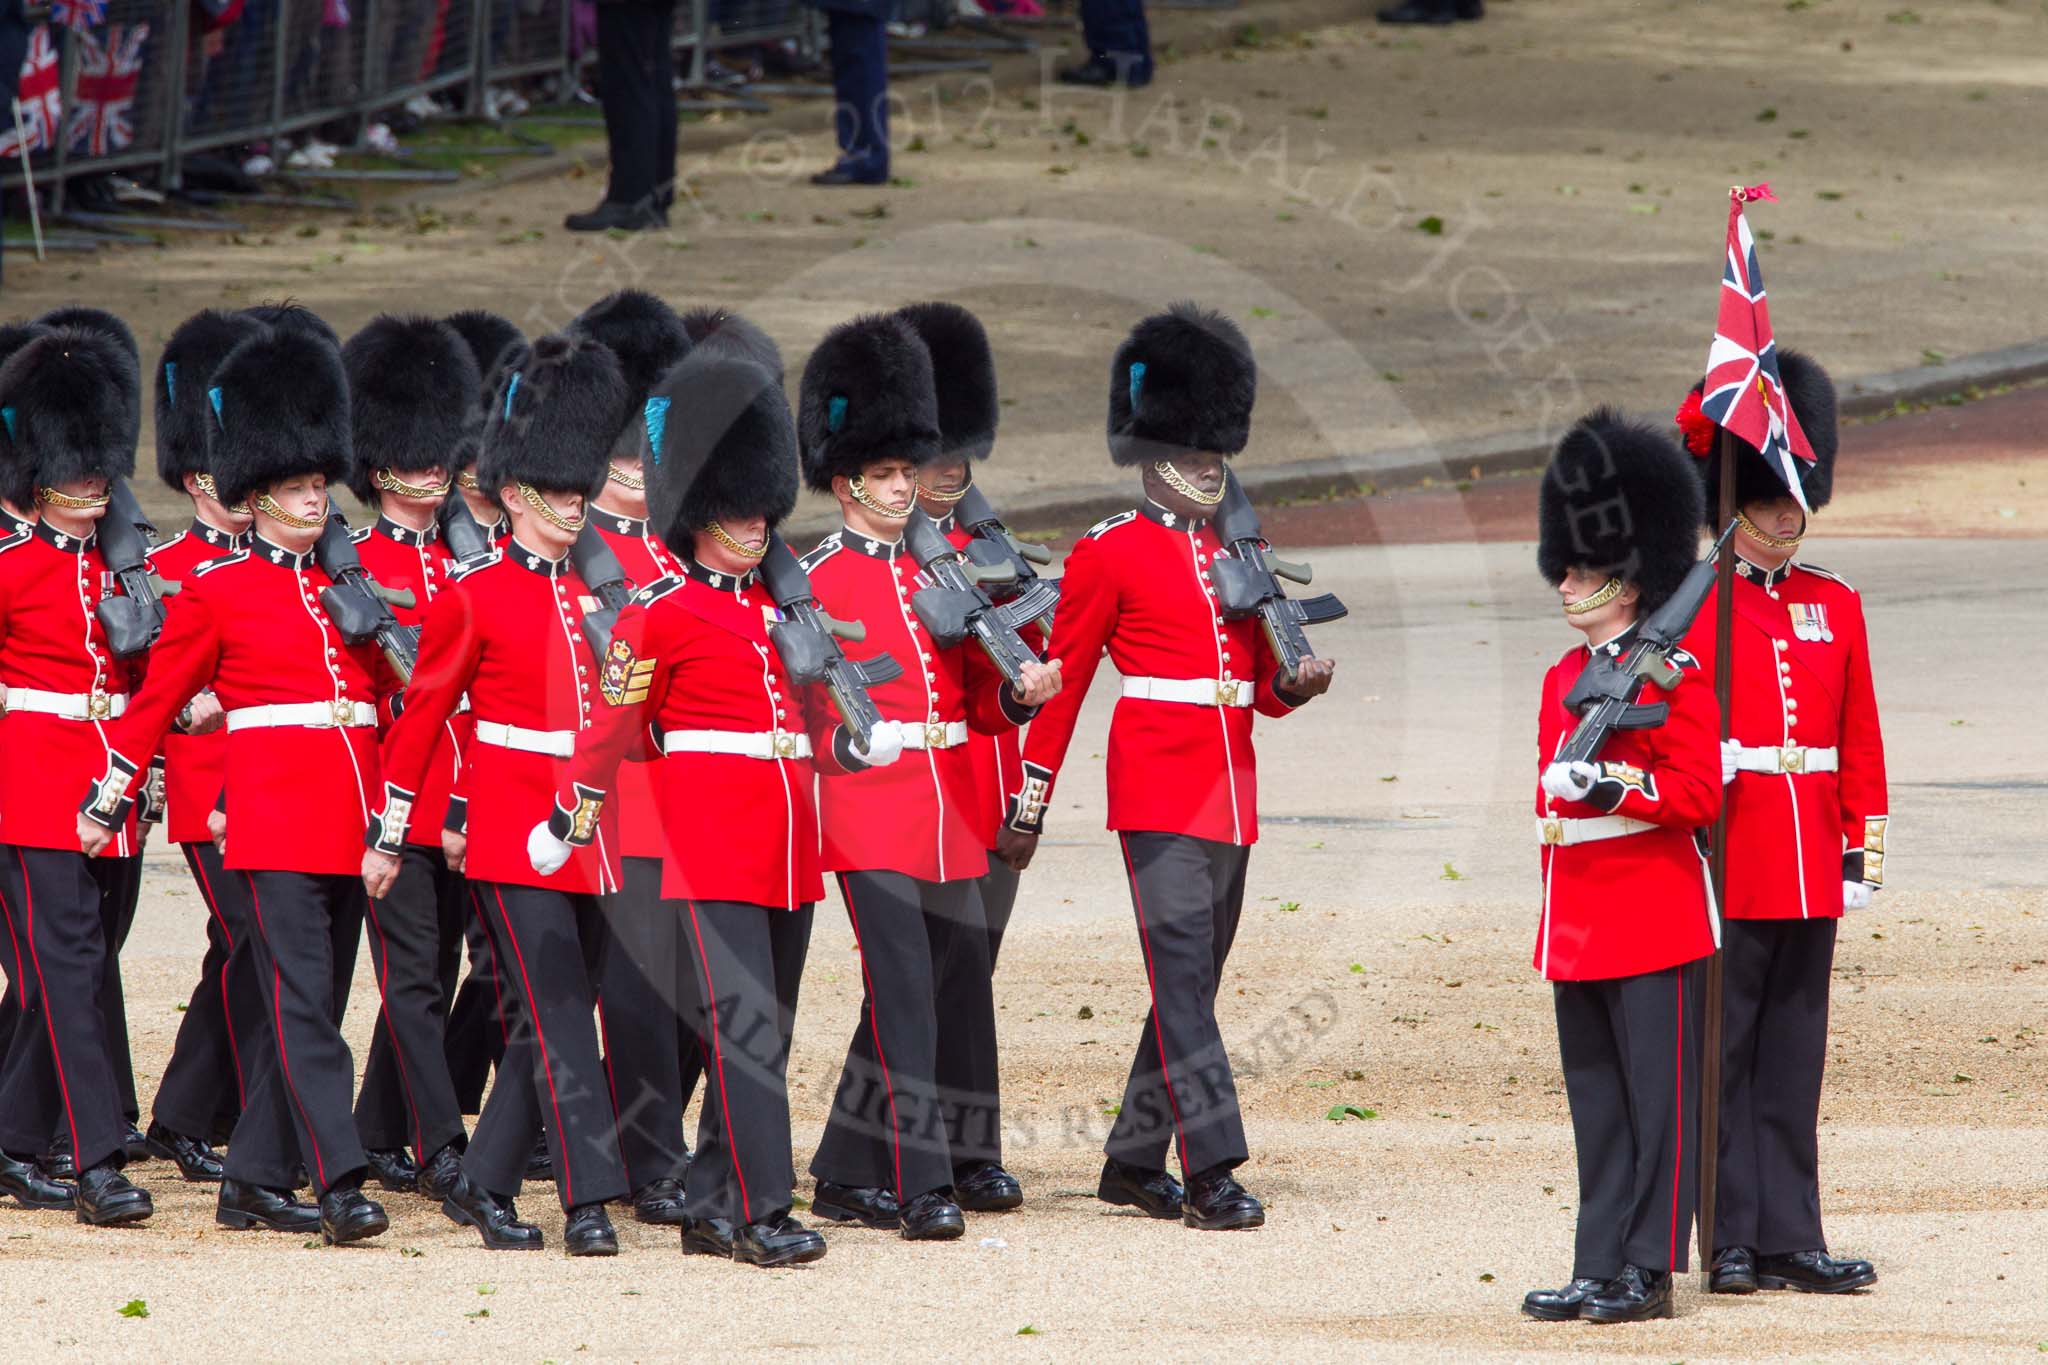 The Colonel's Review 2012: No. 5 Guard (1st Battalion Irish Guards) arriving at Horse Guards Parade..
Horse Guards Parade, Westminster,
London SW1,

United Kingdom,
on 09 June 2012 at 10:23, image #46